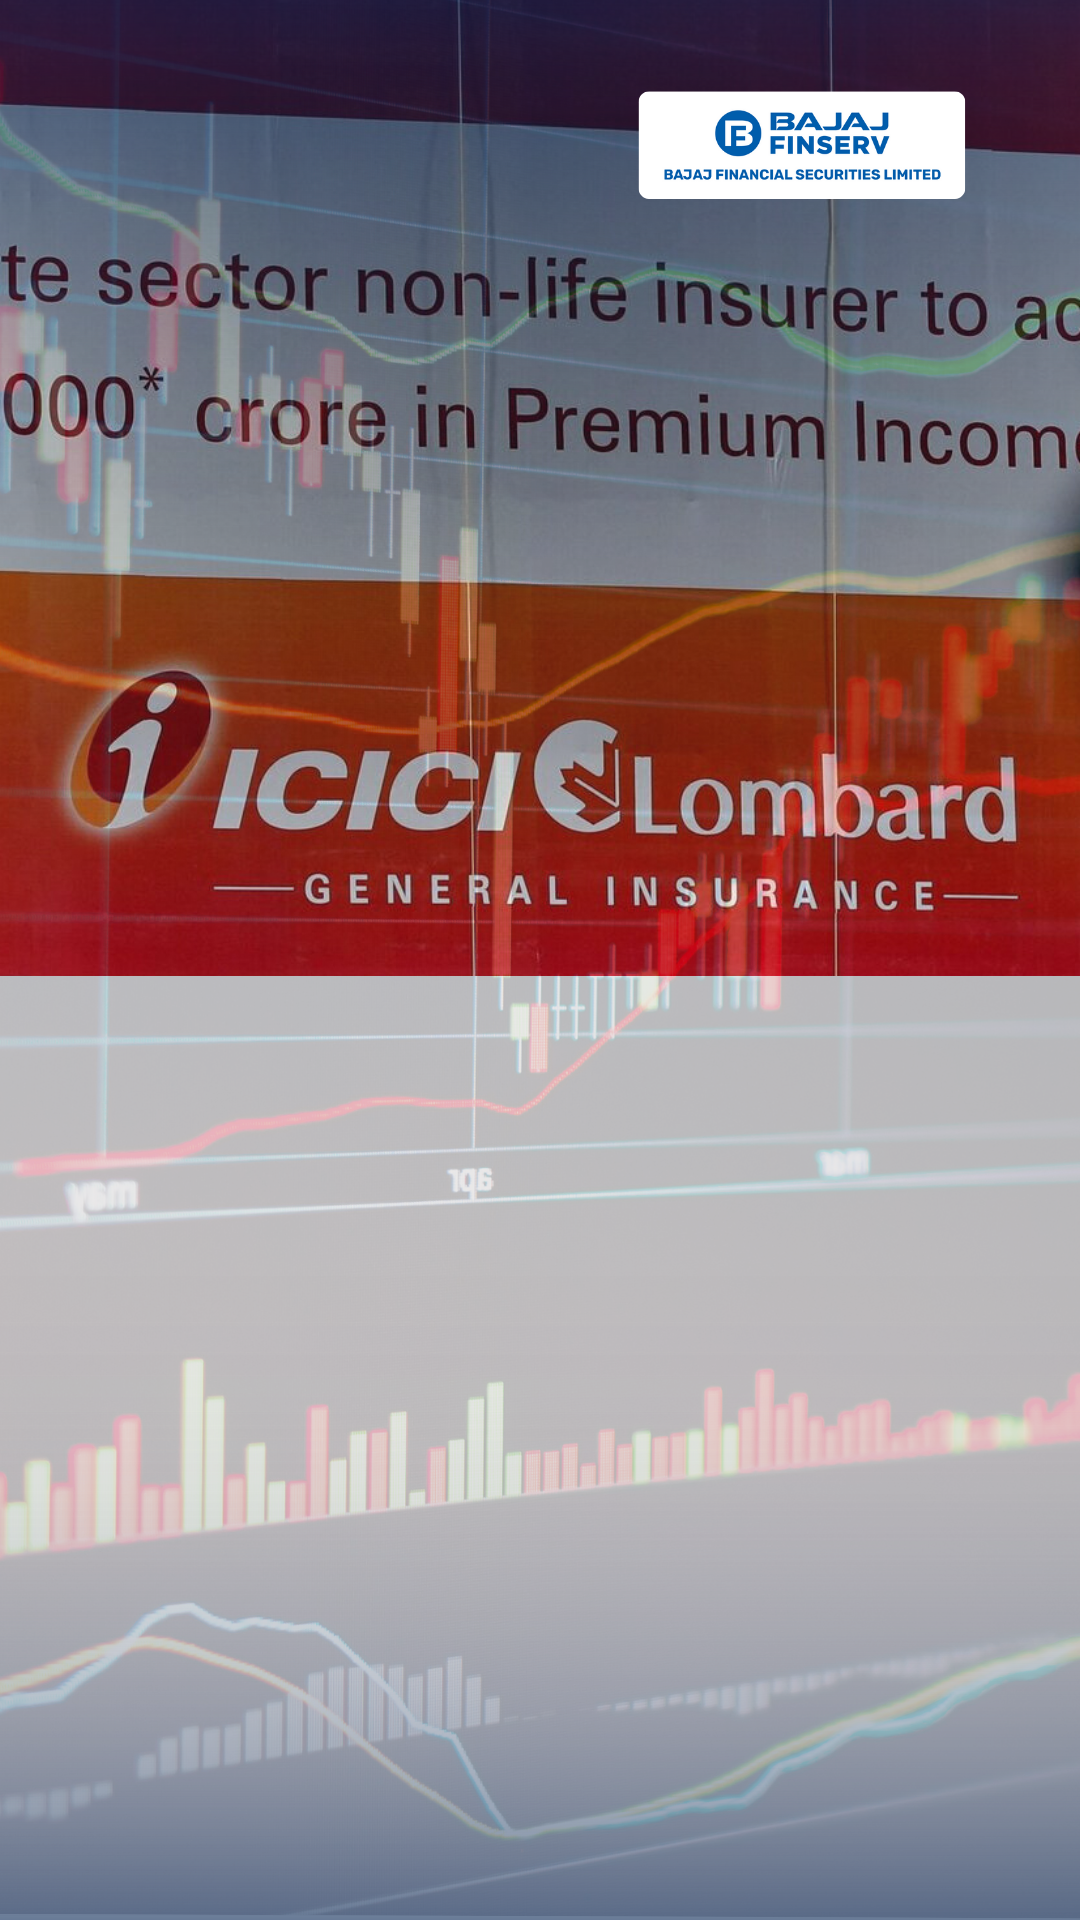 Sanjeev Mantri Takes the Helm as MD & CEO of ICICI Lombard